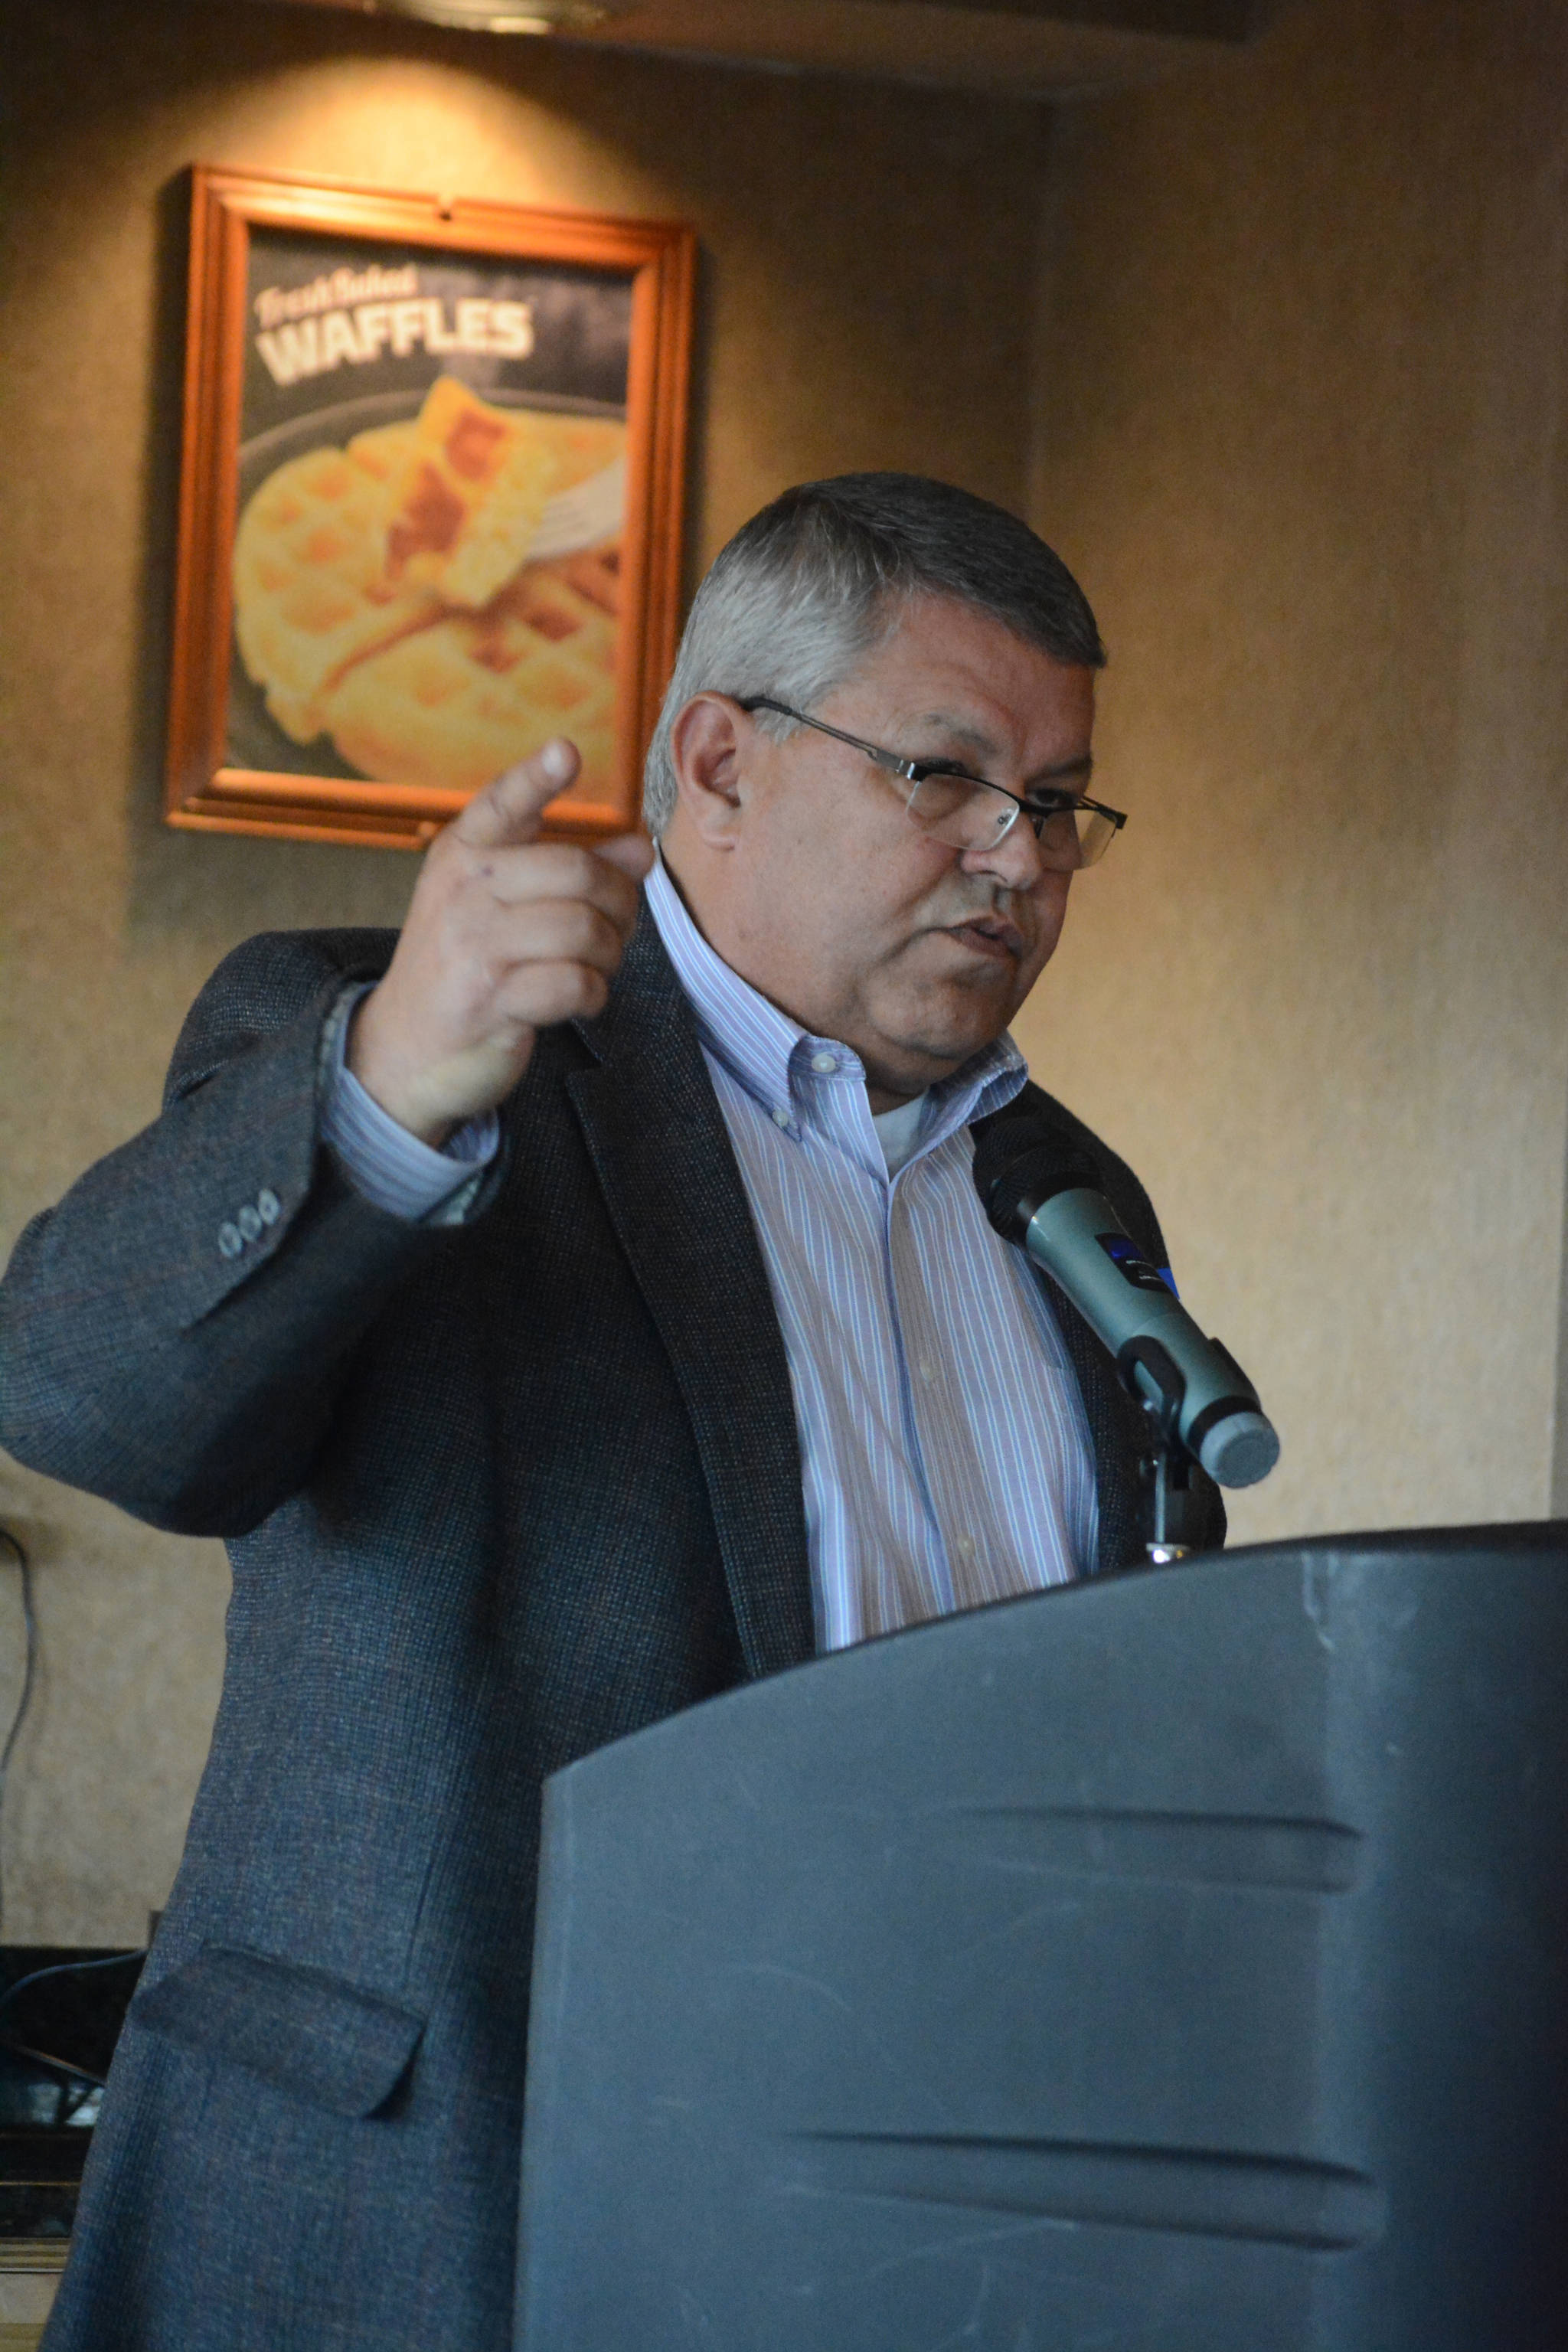 Kenai Peninsula Borough Mayor Charlie Pierce speaks at the Homer Chamber of Commerce and Visitor Center’s luncheon on Tuesday, May 8, 2018, at the Best Western Bidarka Inn in Homer, Alaska. (Photo by Michael Armstrong/Homer News)